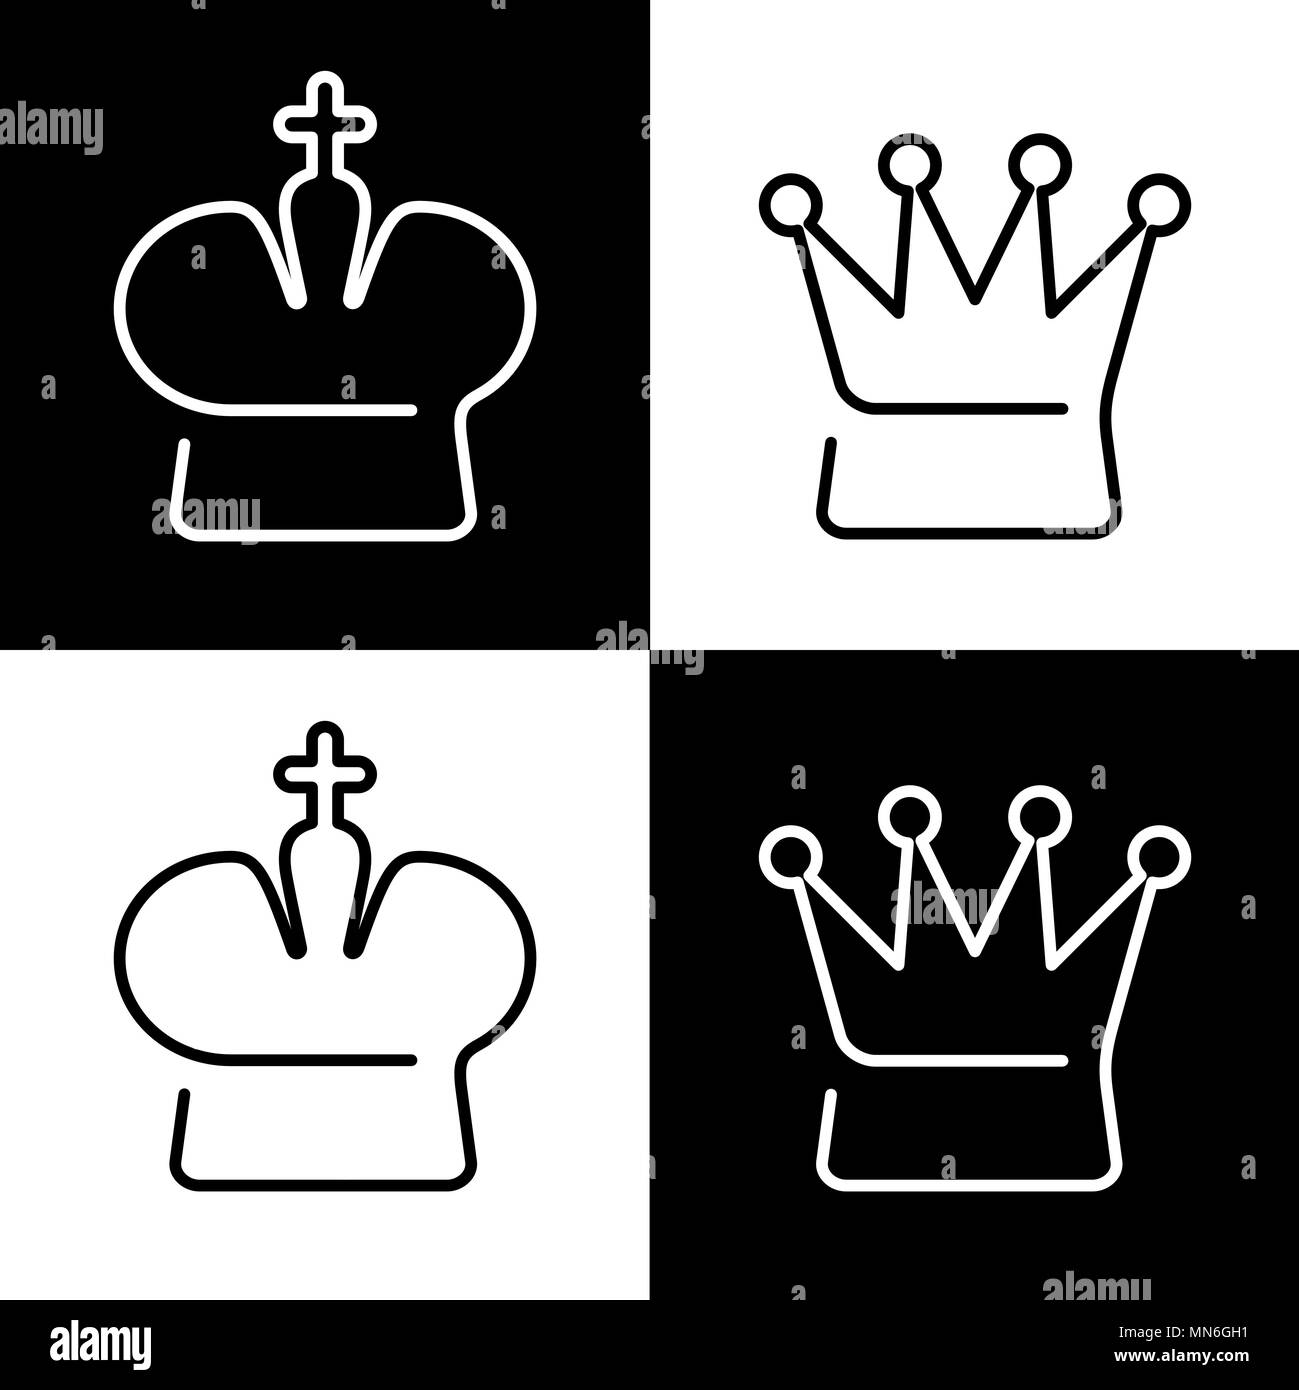 King crown with cross on top grey silhouette isolated cartoon flat vector  illustration on white, Stock Vector, Vector And Low Budget Royalty Free  Image. Pic. ESY-051179378